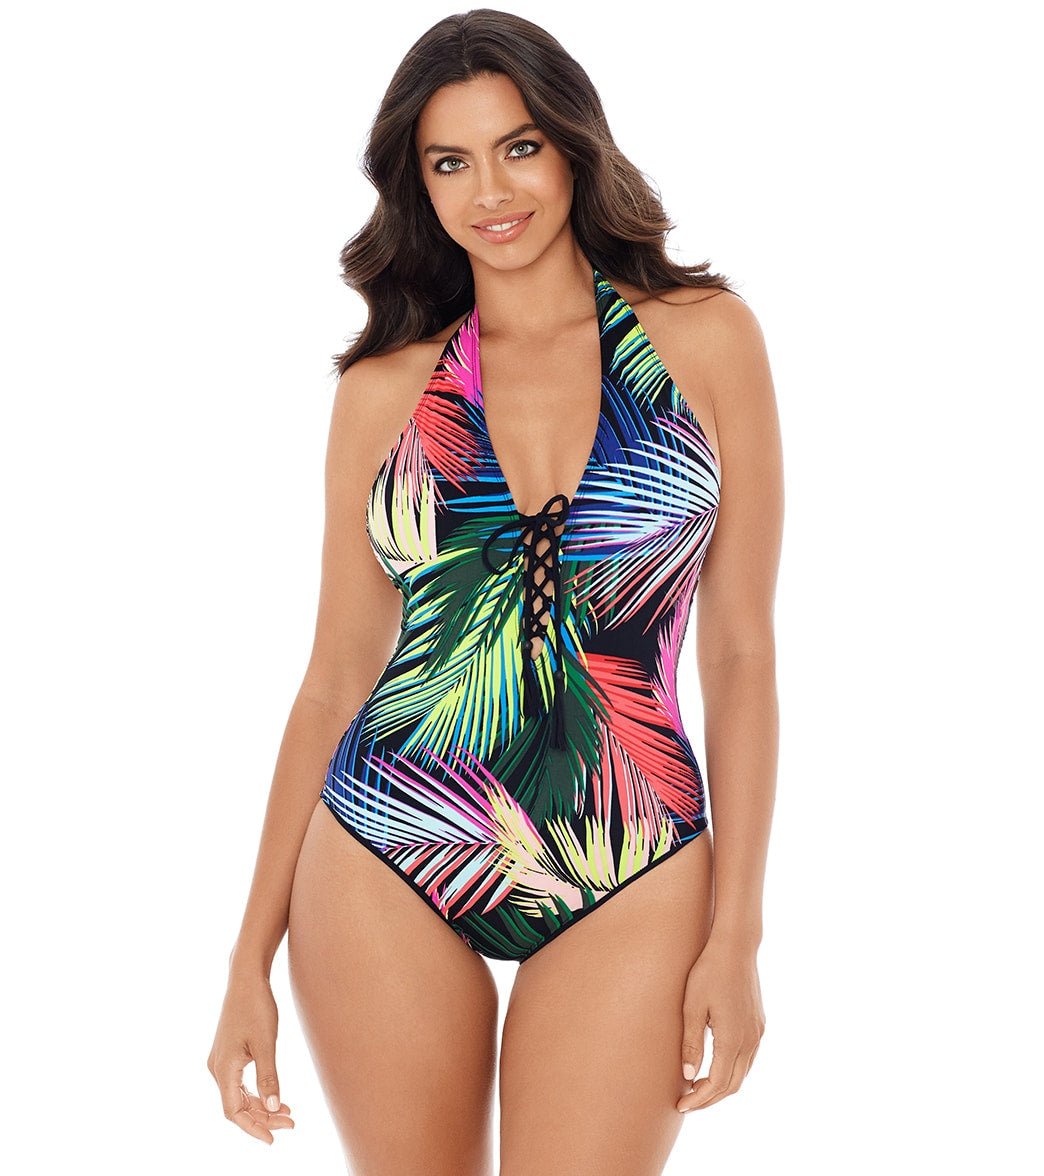 Skinny Dippers By Miraclesuit Women's Bright Lights Sirene Halter One Piece Swimsuit - Multi Large - Swimoutlet.com